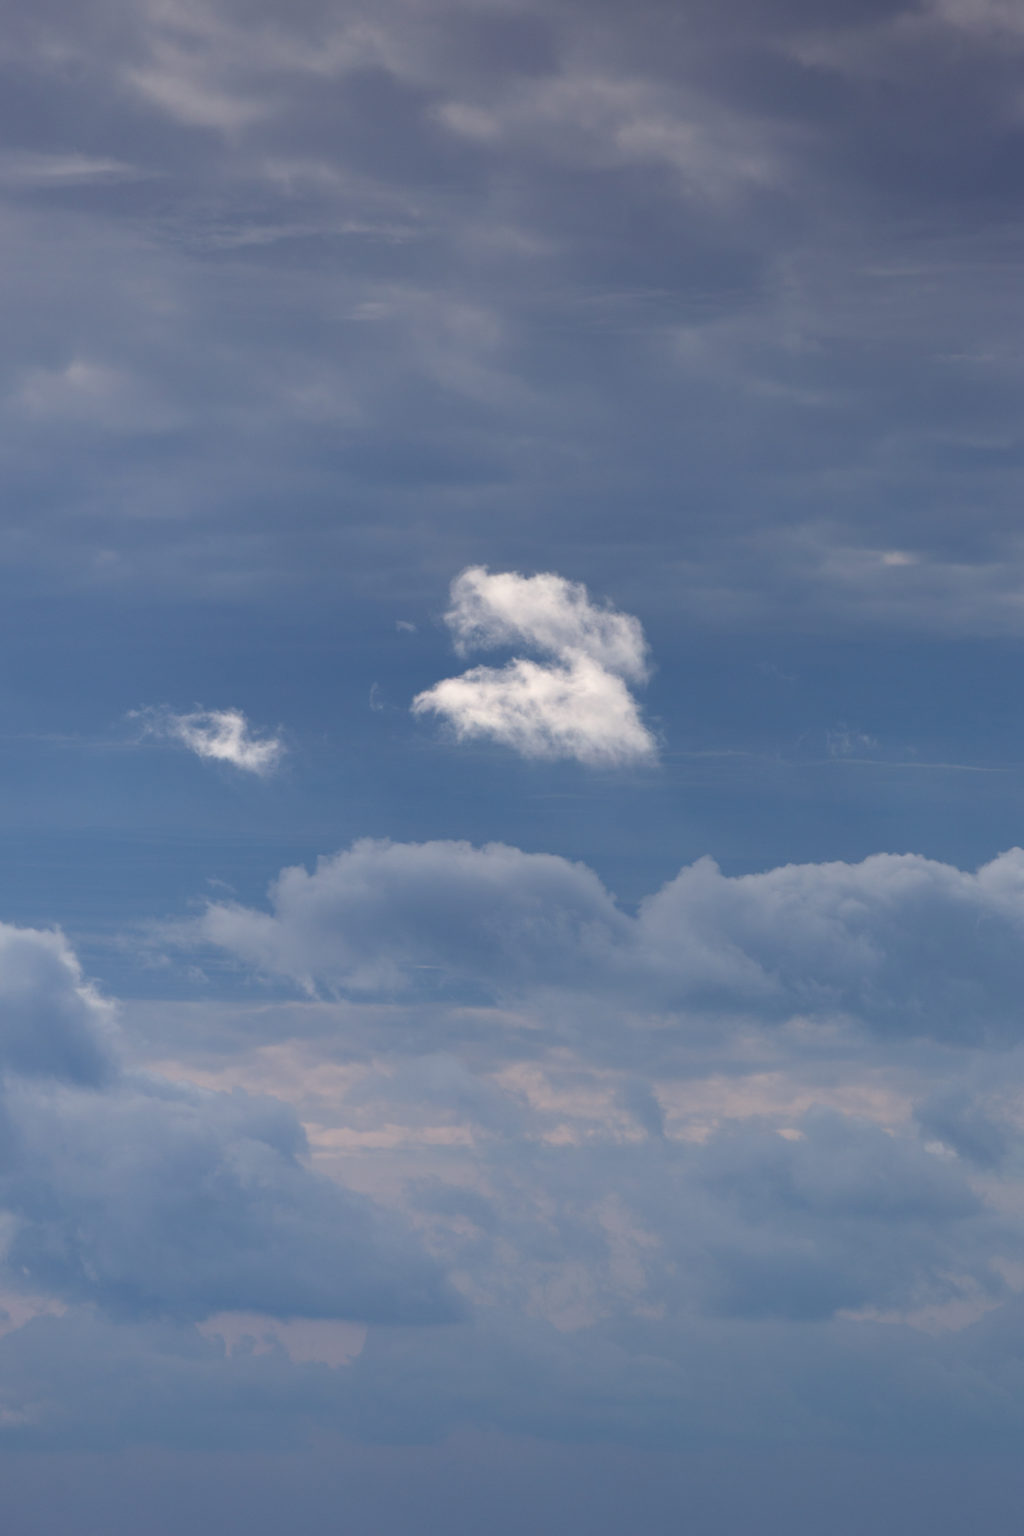 Small Bright Cloud Against Muted Clouds